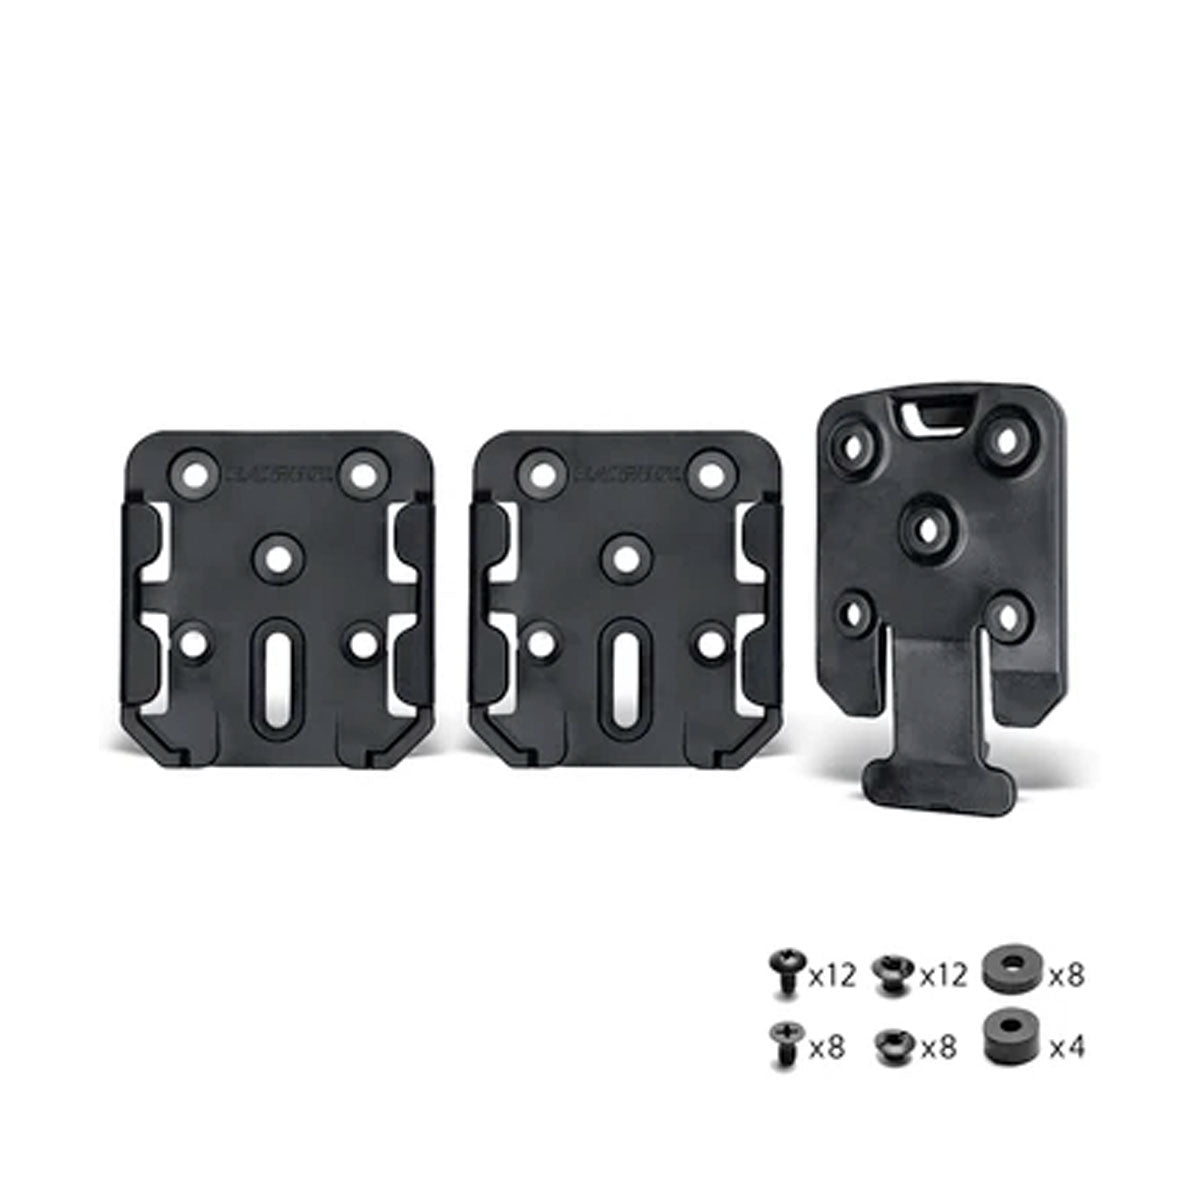 Blade-Tech TMMS Tactical Modular System Small Accessories Blade-Tech Holsters Kit (2 Outer/Receiver Plate & 1 Inner - Insert Plate) Tactical Gear Supplier Tactical Distributors Australia